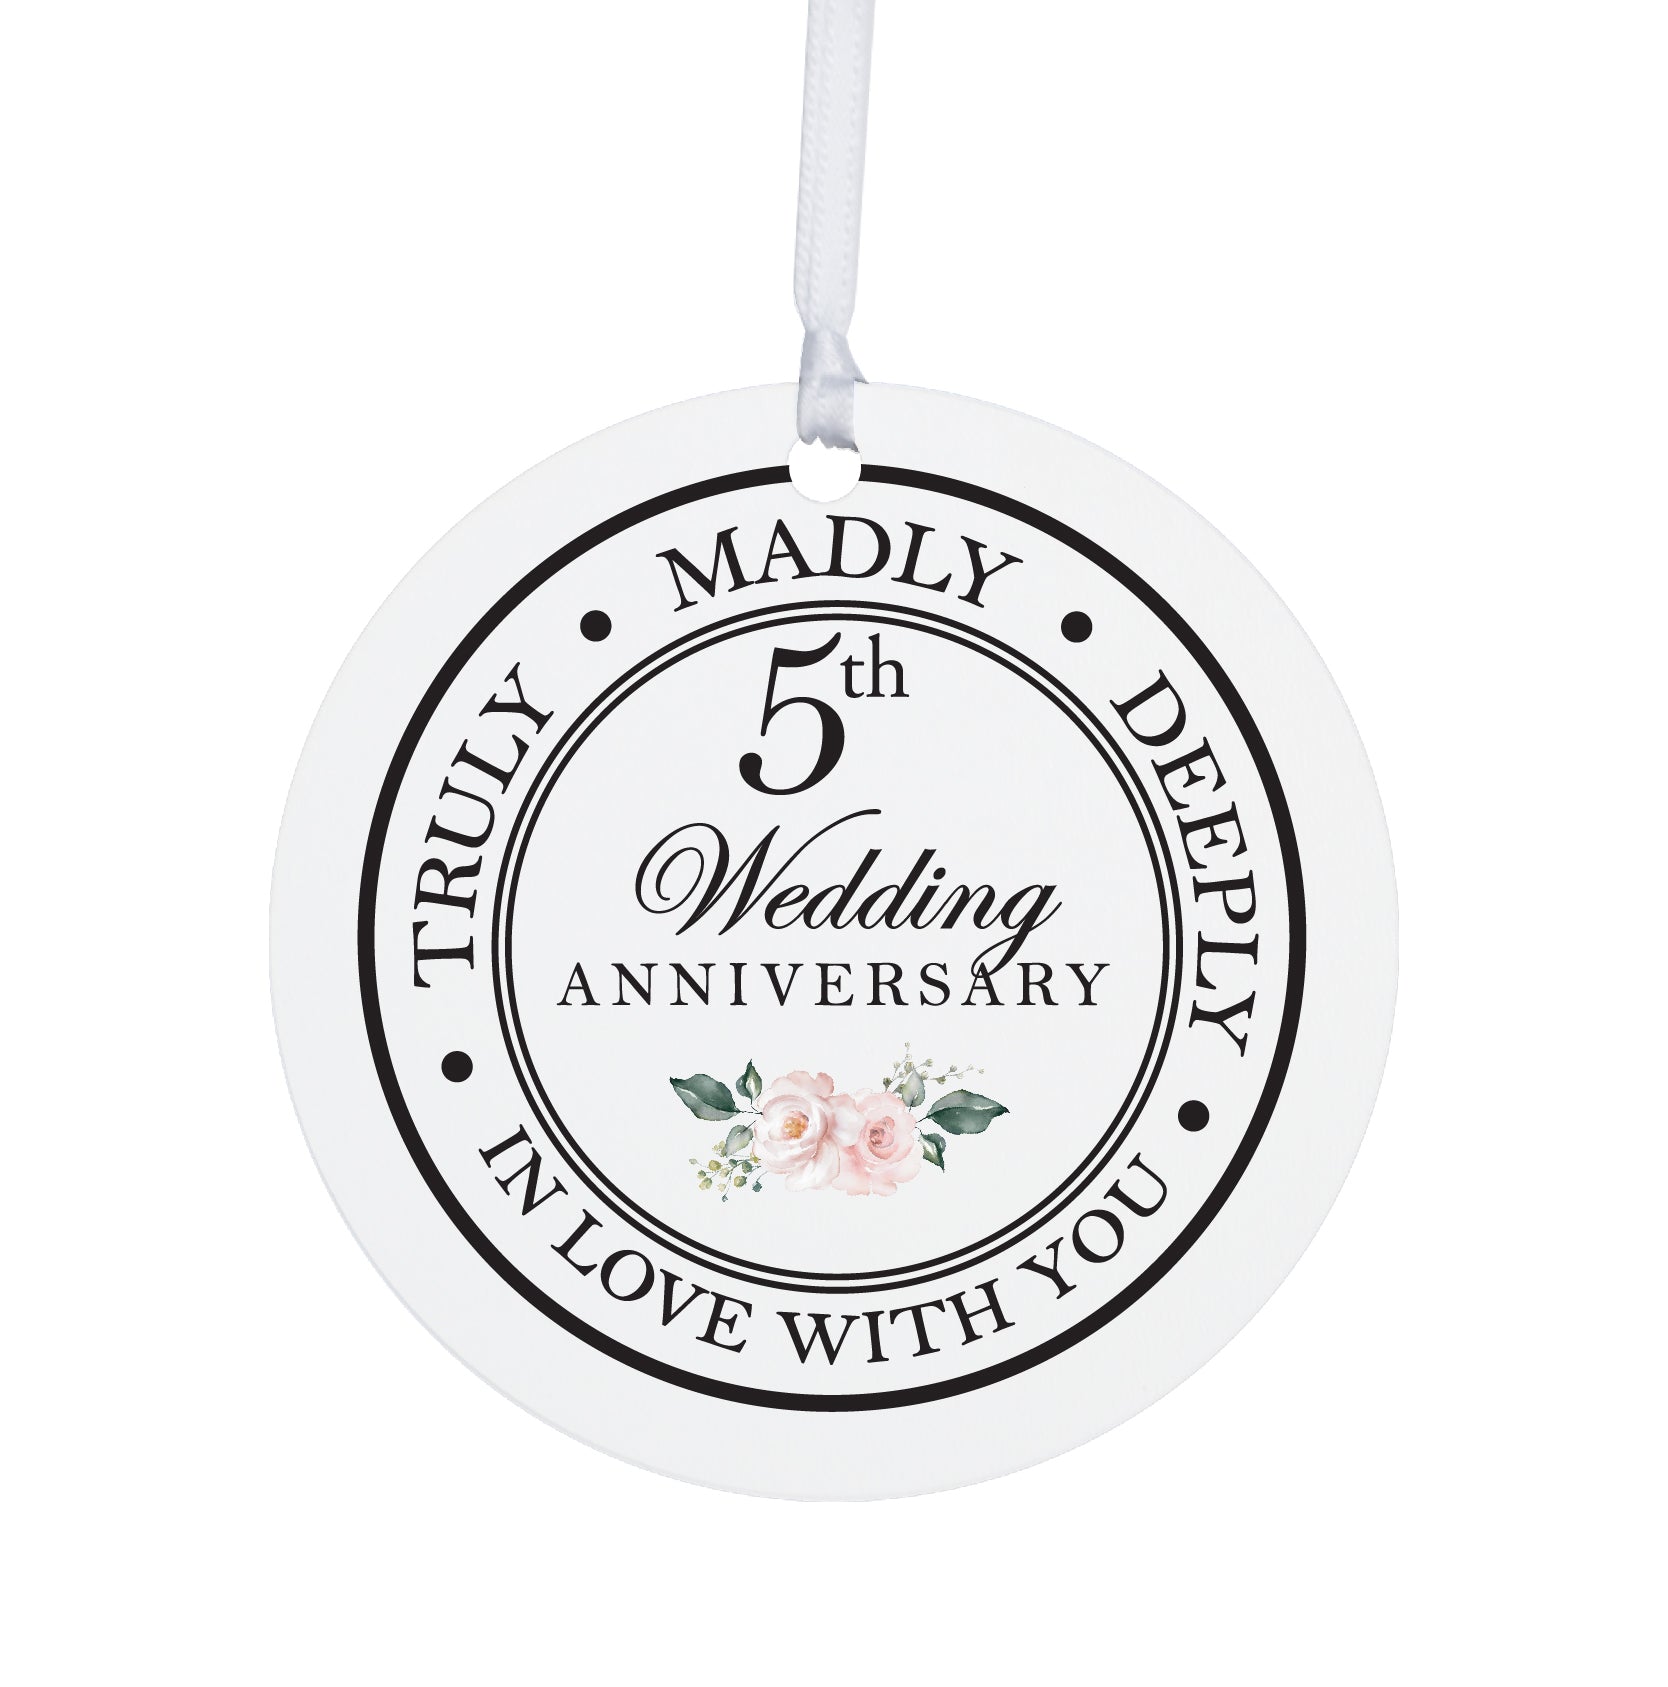 5th Wedding Anniversary White Ornament With Inspirational Message Gift Ideas - Truly, Madly, Deeply In Love With You